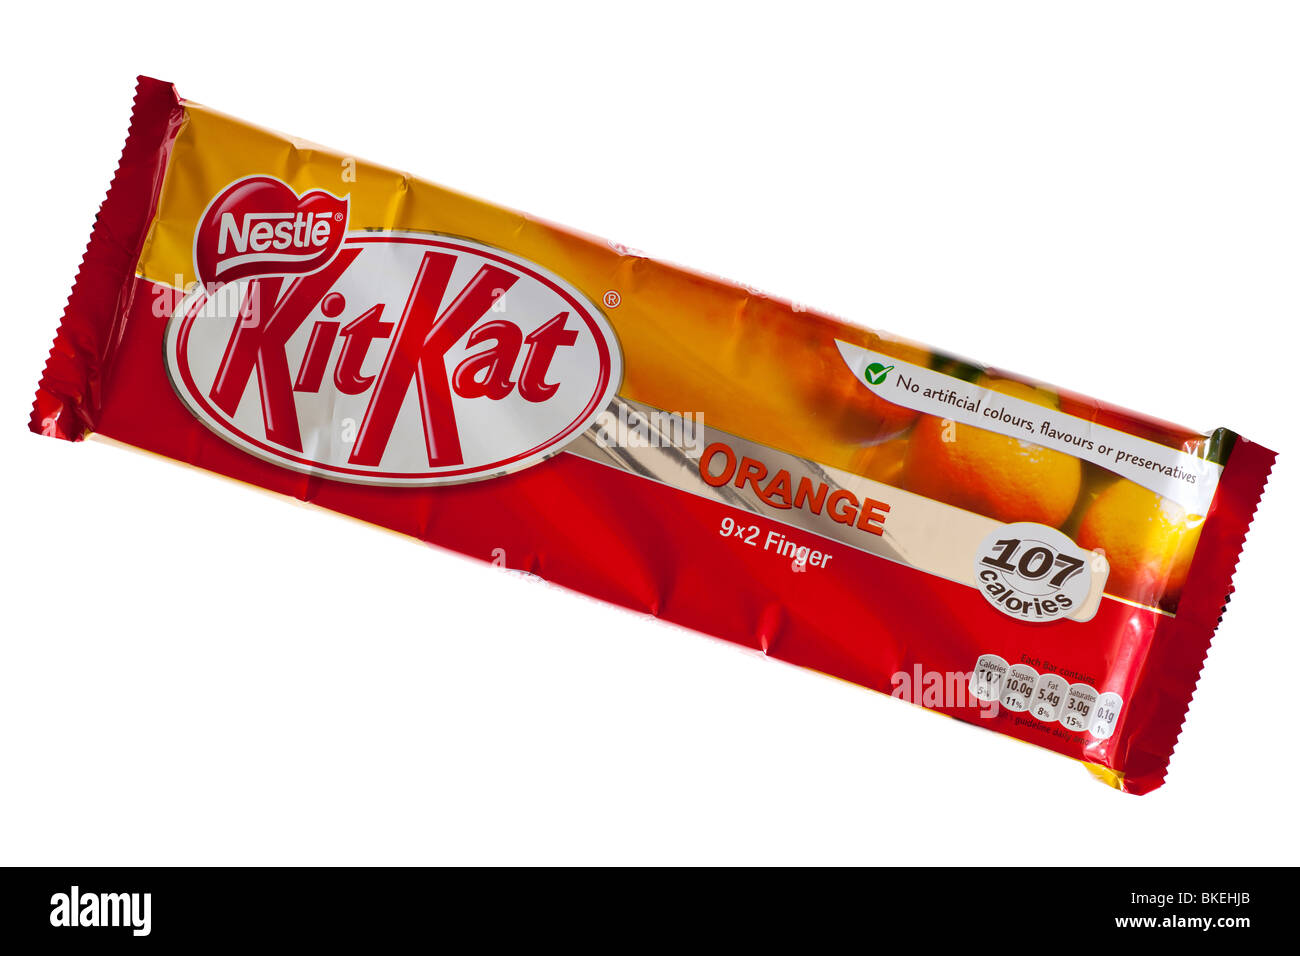 single two finger pack of orange flavoured Nestle KitKat biscuit Stock Photo